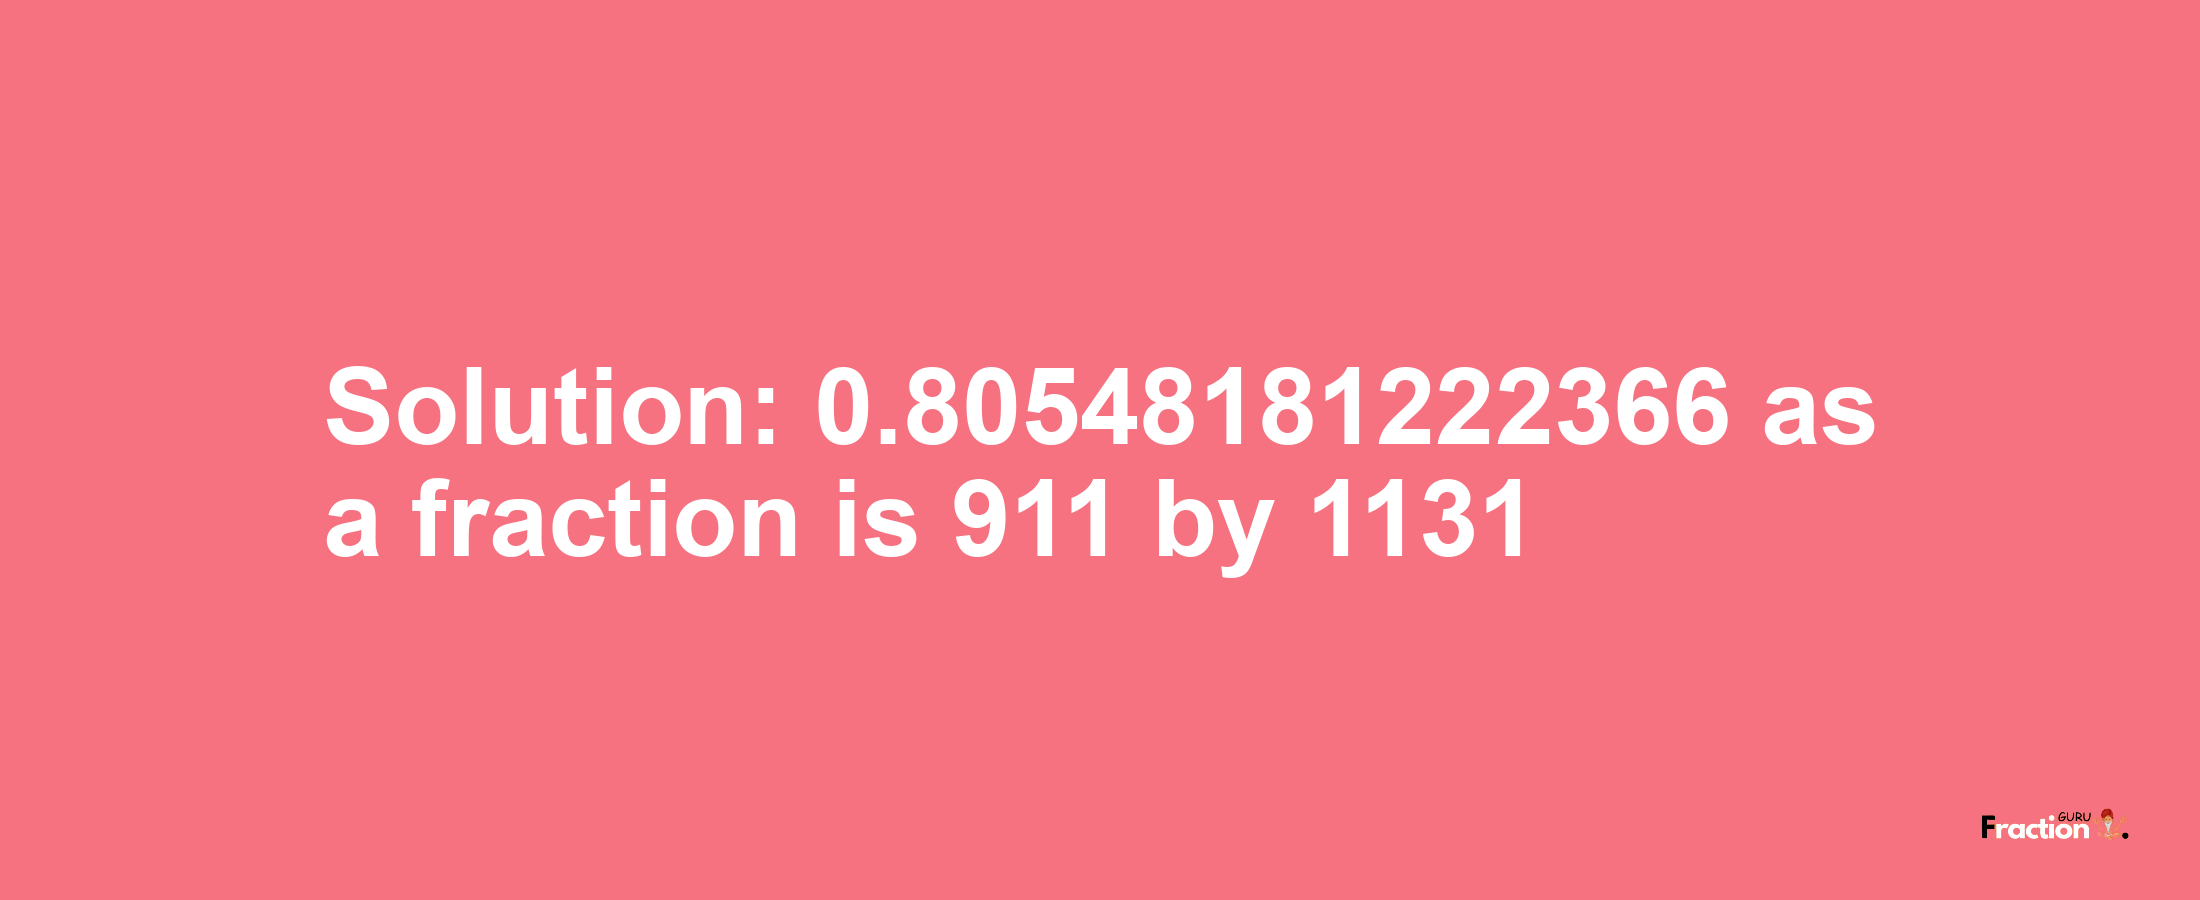 Solution:0.80548181222366 as a fraction is 911/1131